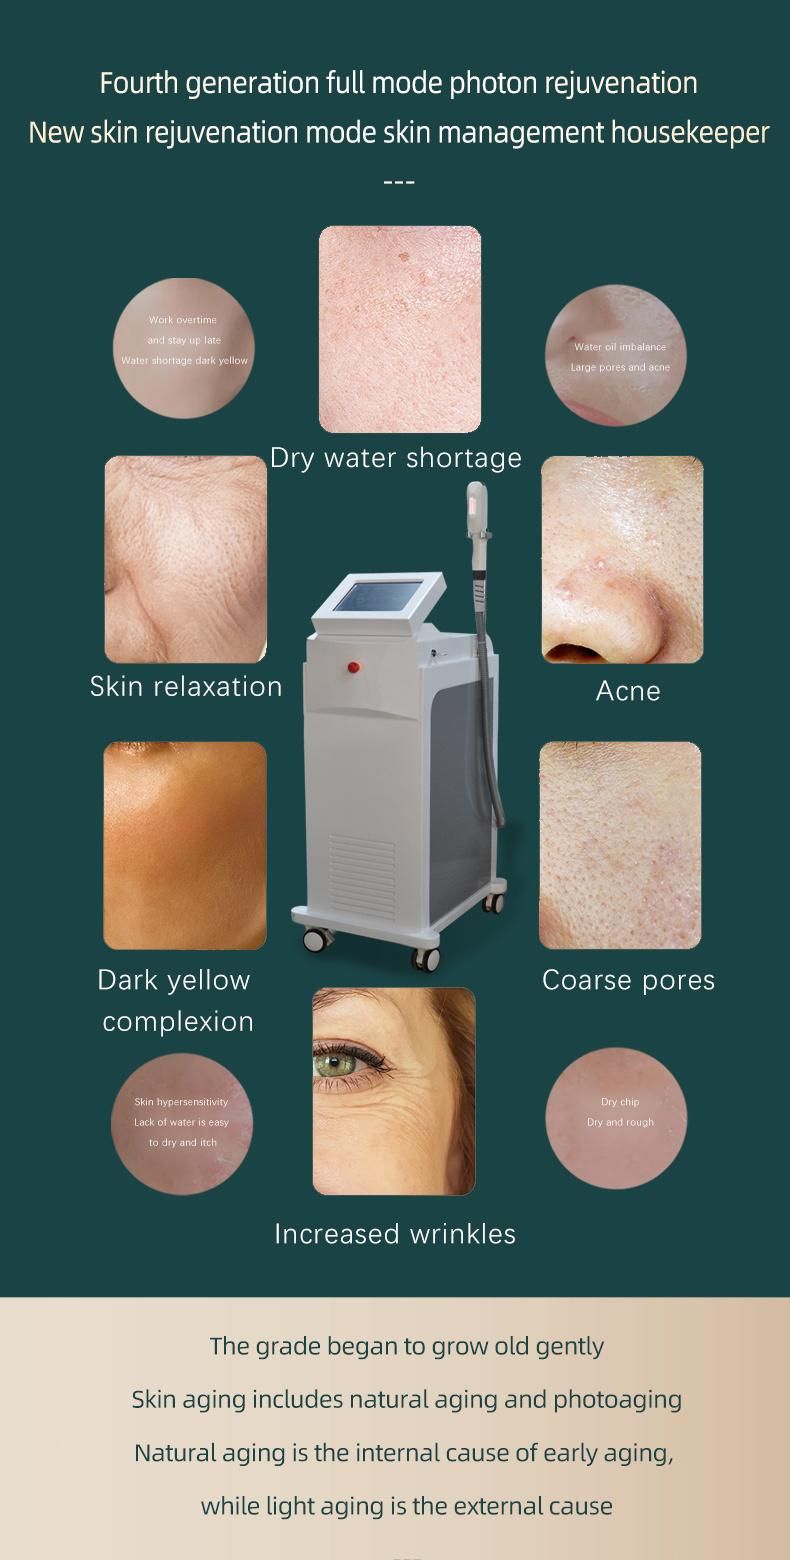 Opt Face Hair Removal /Skin Tighten/Tattoo Removal Multifunction Laser Machine